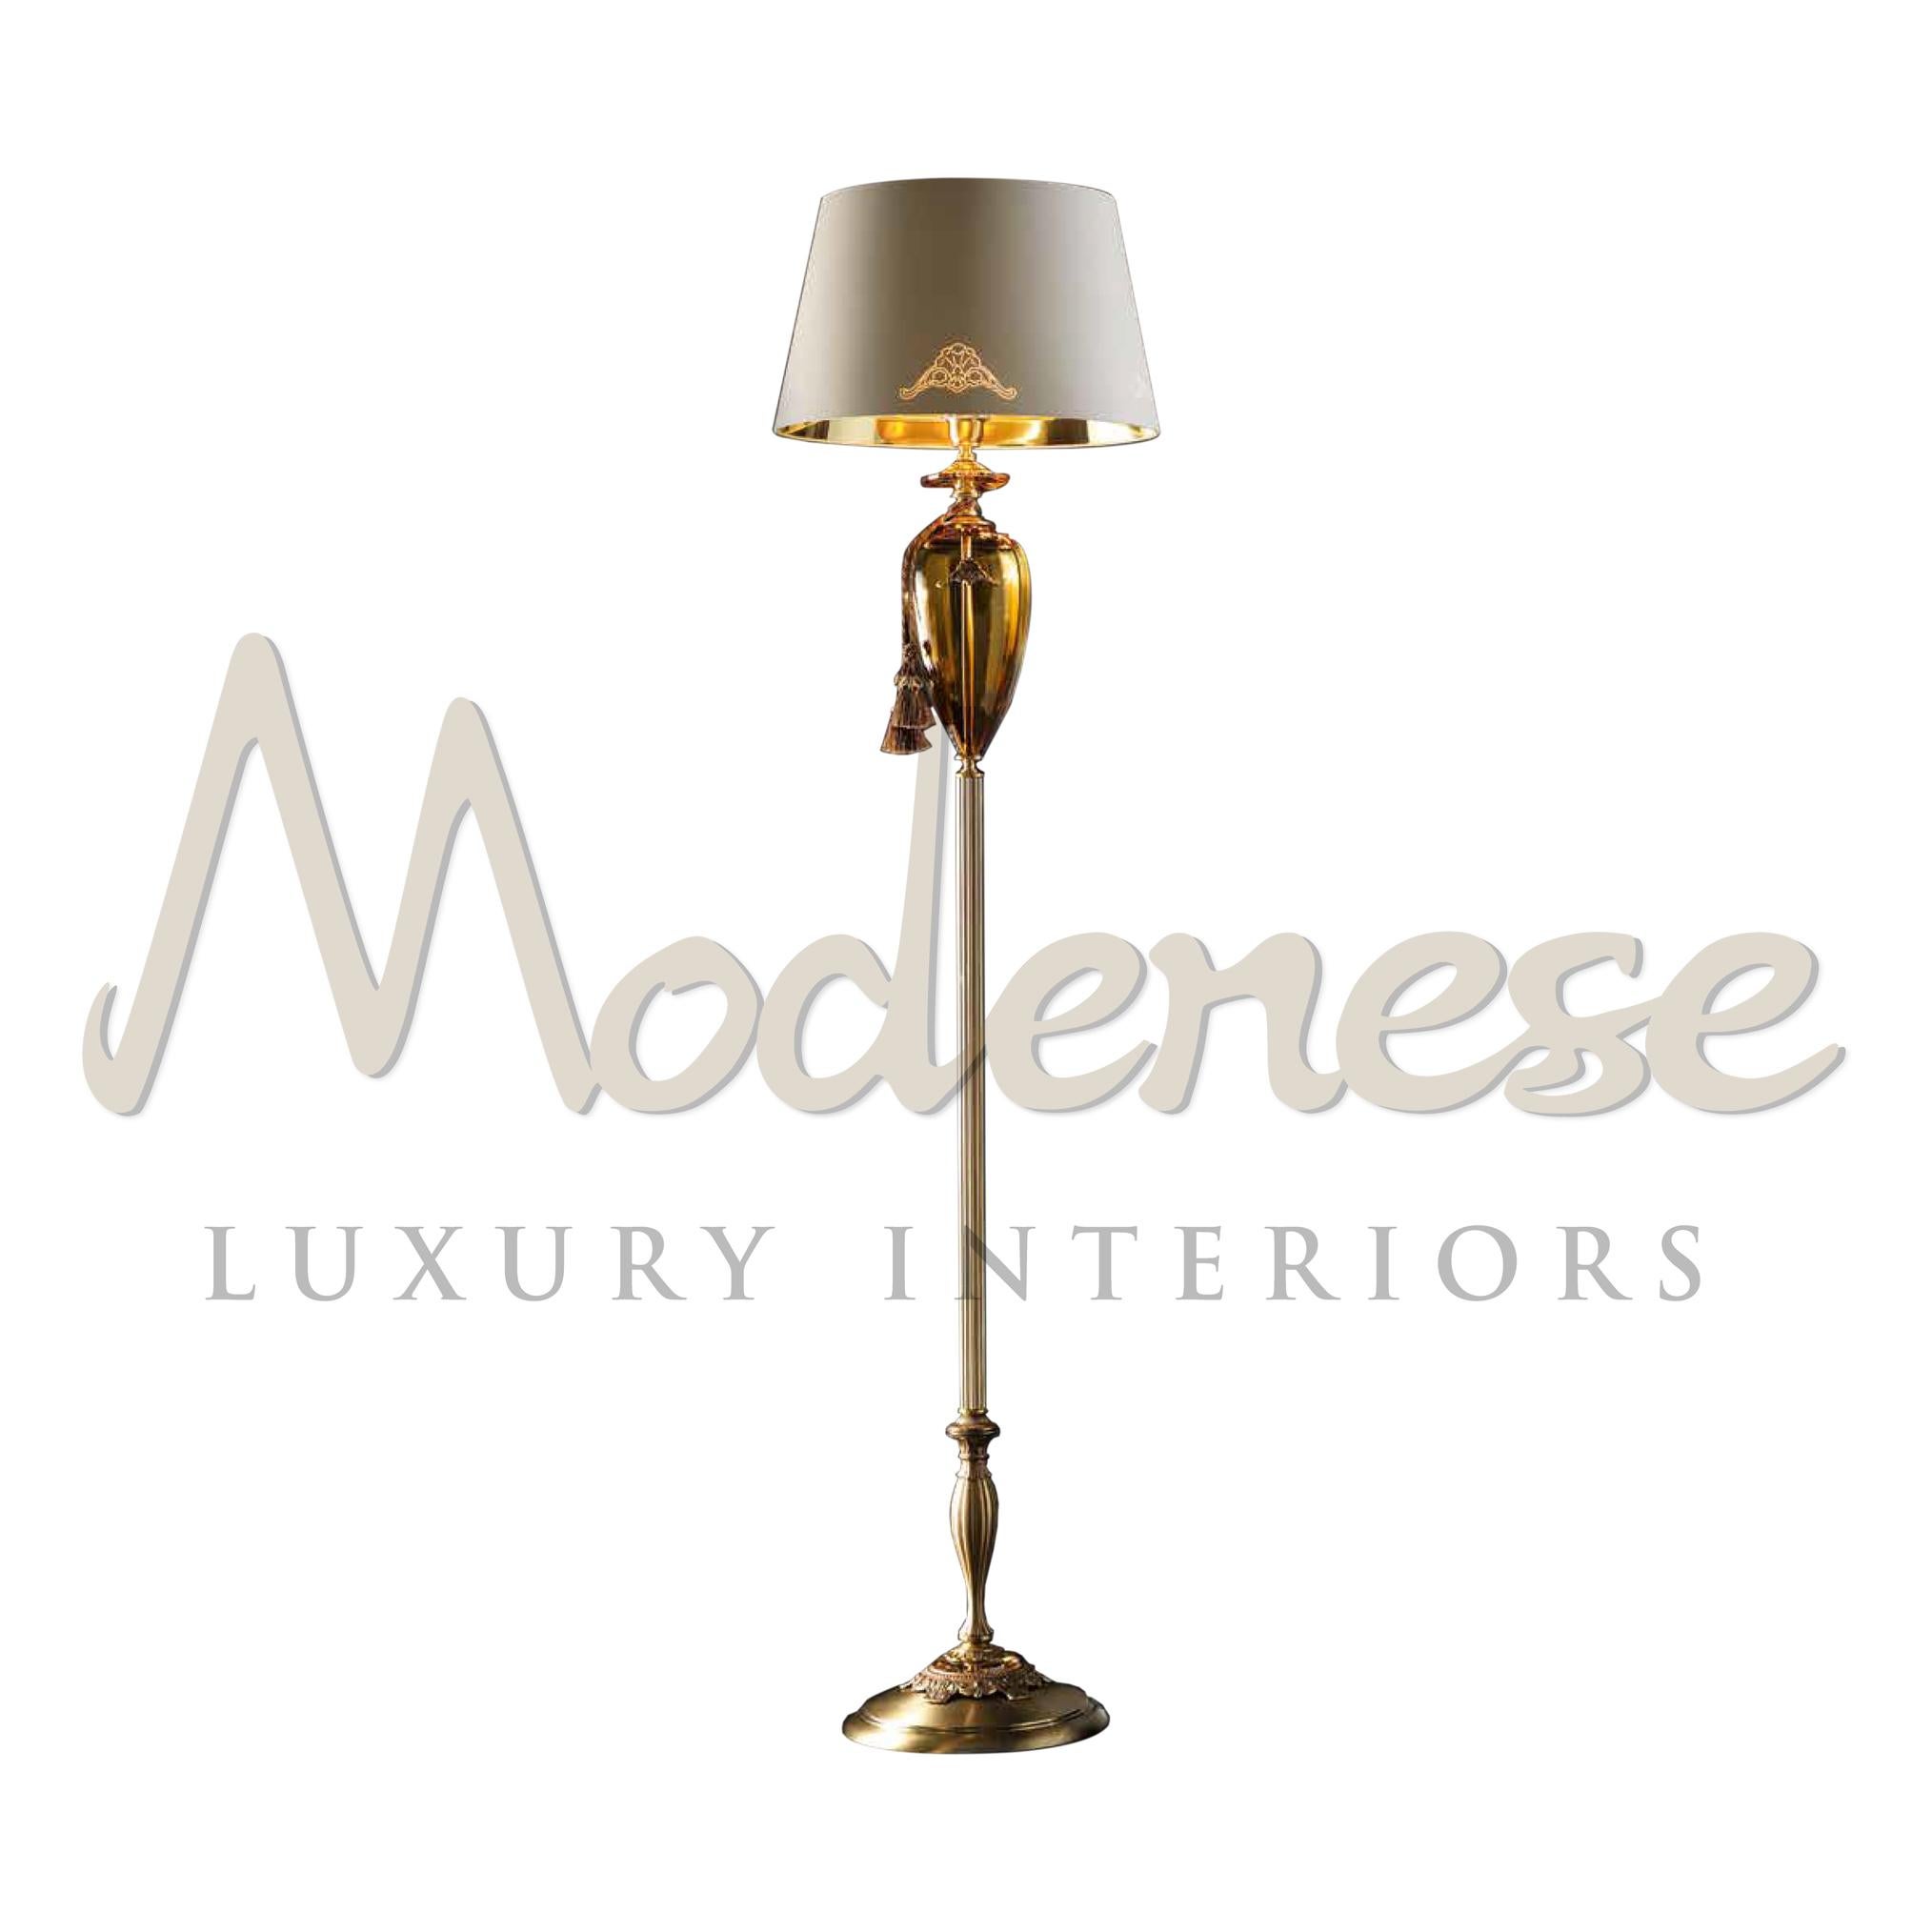 This rich floor lamp is crowned with a stylish decorative brass frame and beautifully complement all models of this collection: gold satin brass, amber crystal details are the characters of this piece. This model requires 1 single E27 screw fit